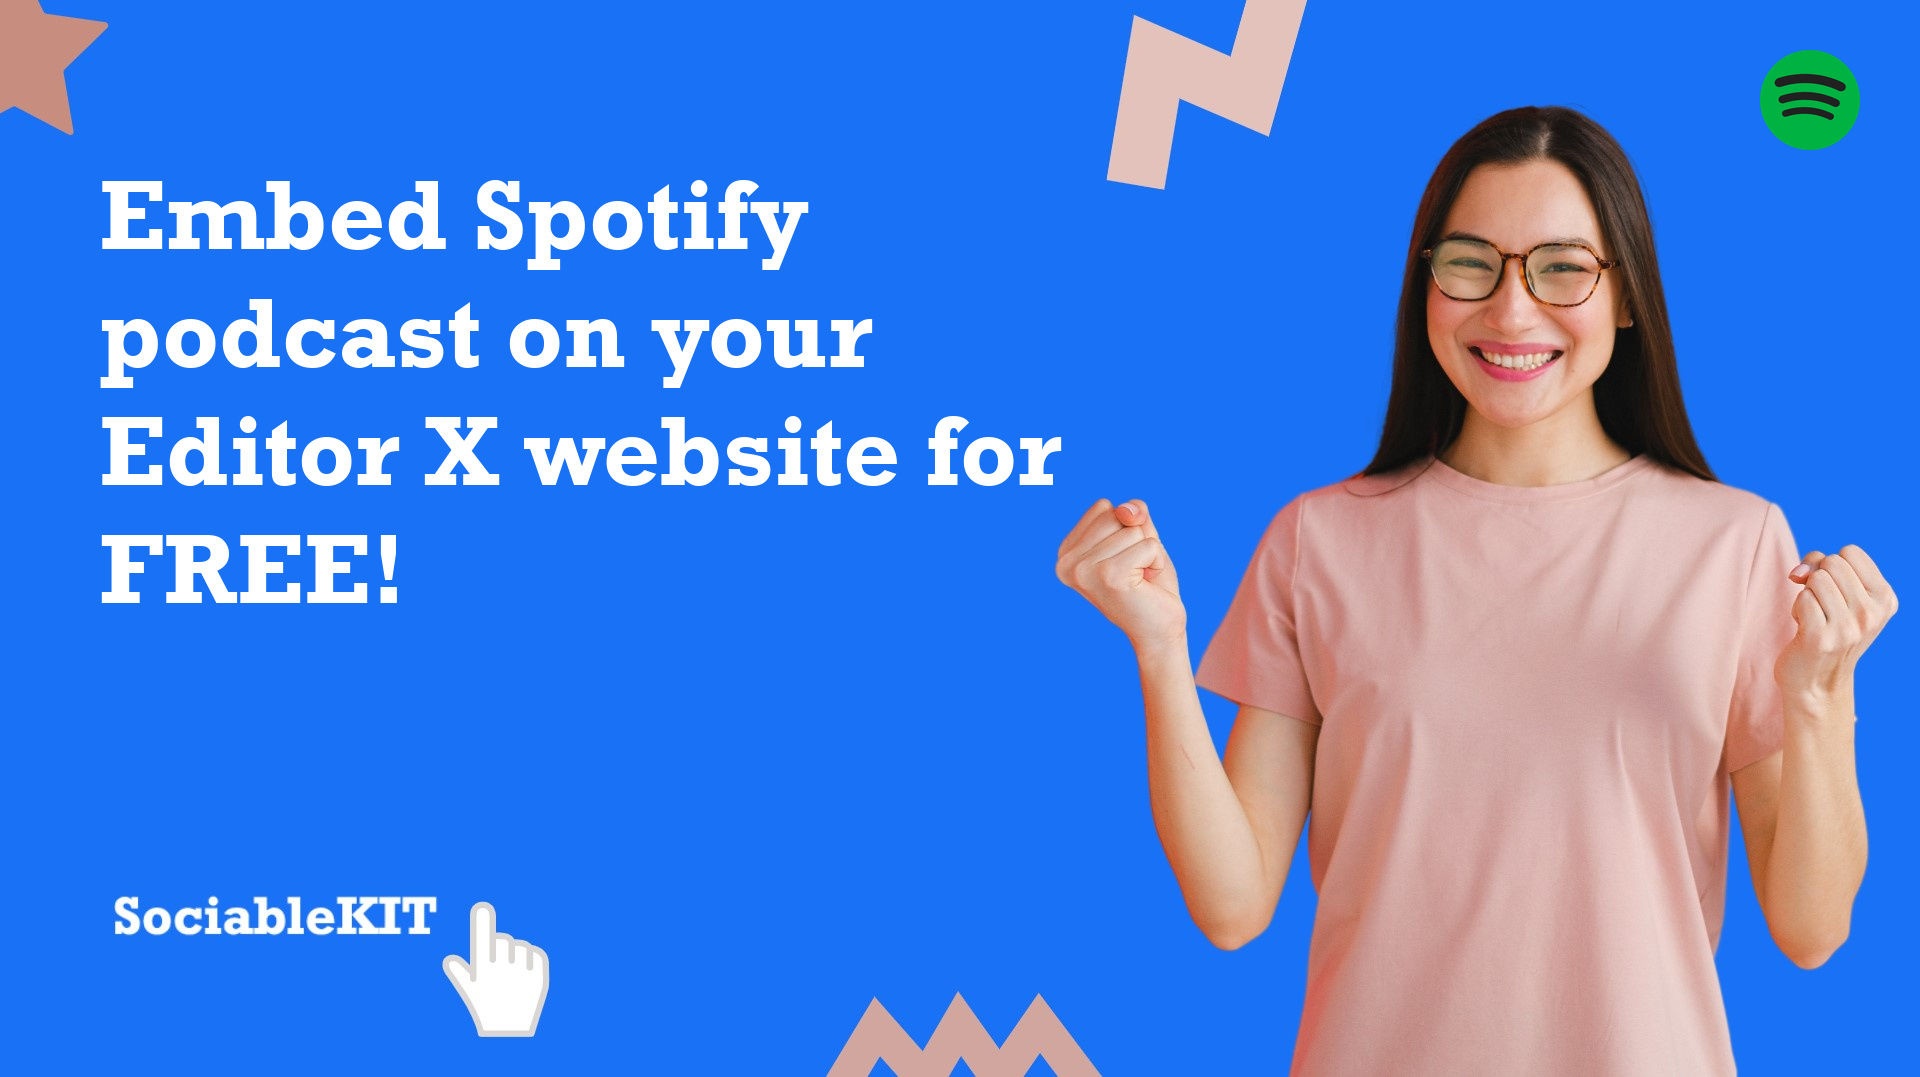 How to embed Spotify podcast on your WordPress website for FREE?